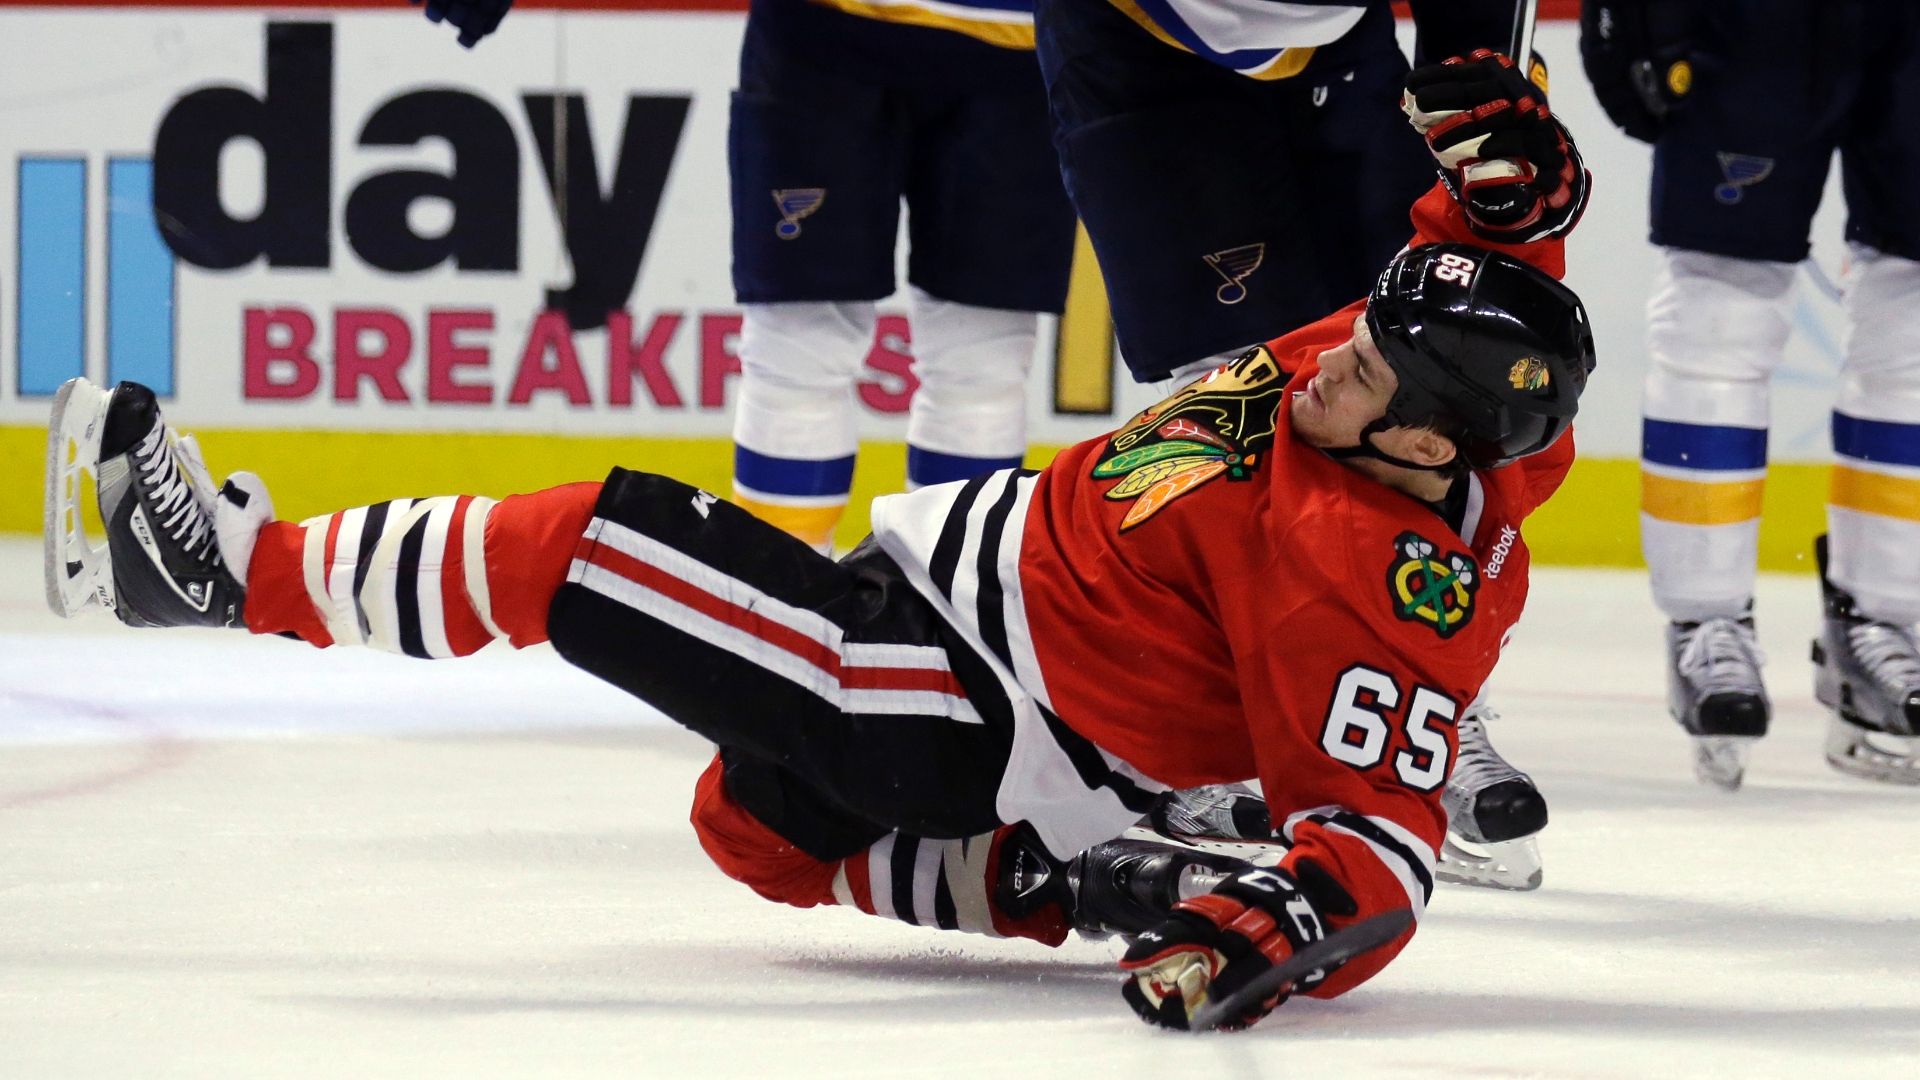 Blackhawks' Andrew Shaw Is Suspended for Anti-Gay Slur - The New York Times